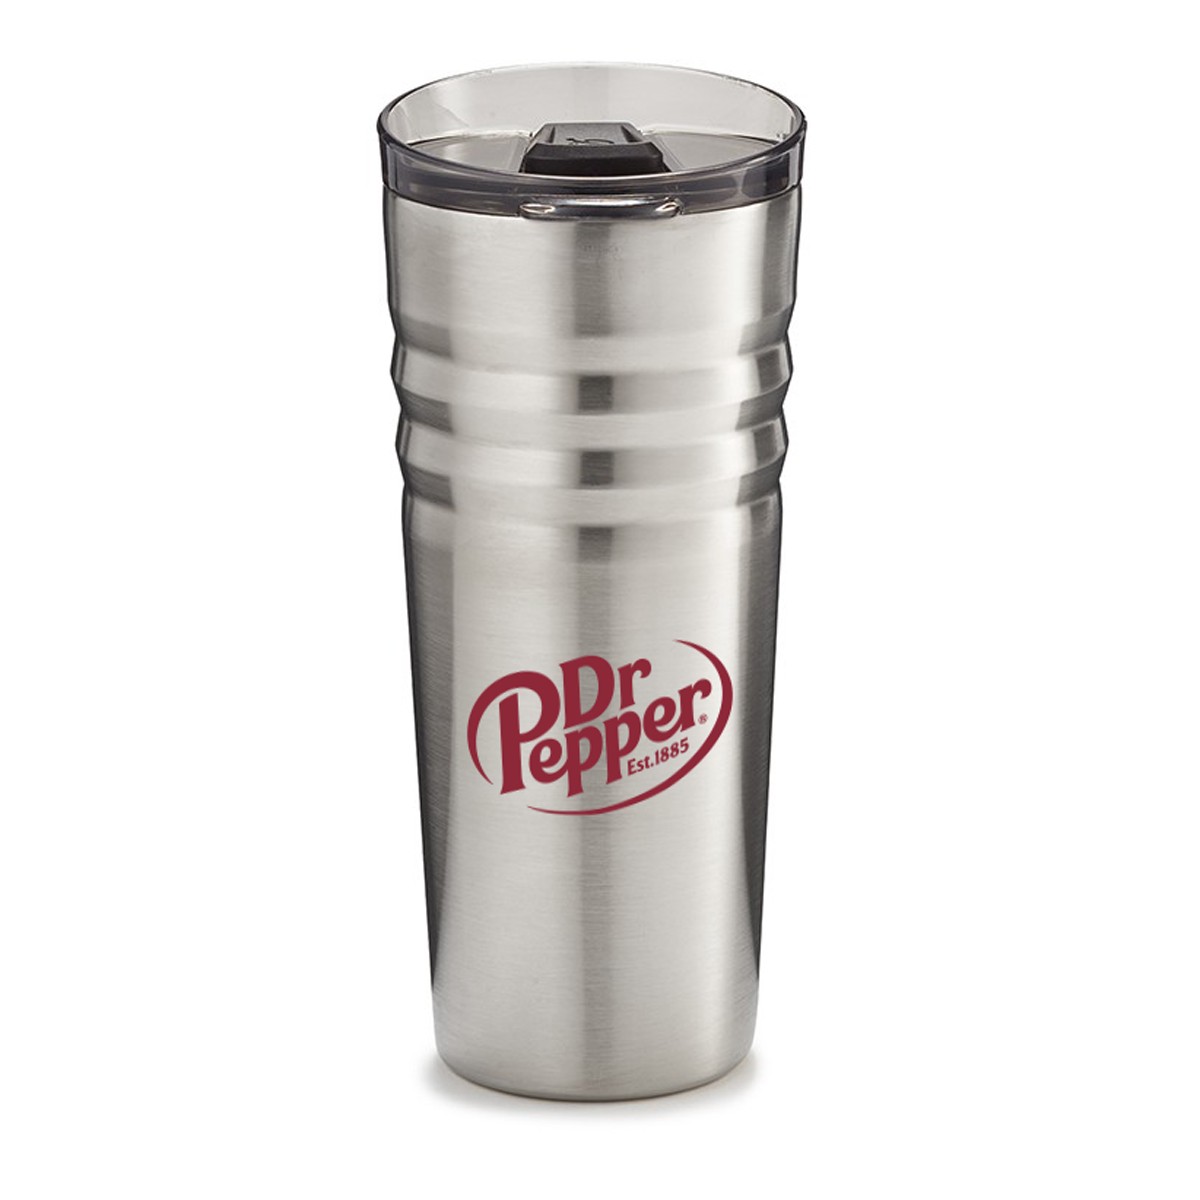 https://www.drpepperstore.com/store/20210906459/assets/items/largeimages/DPE0011.jpg